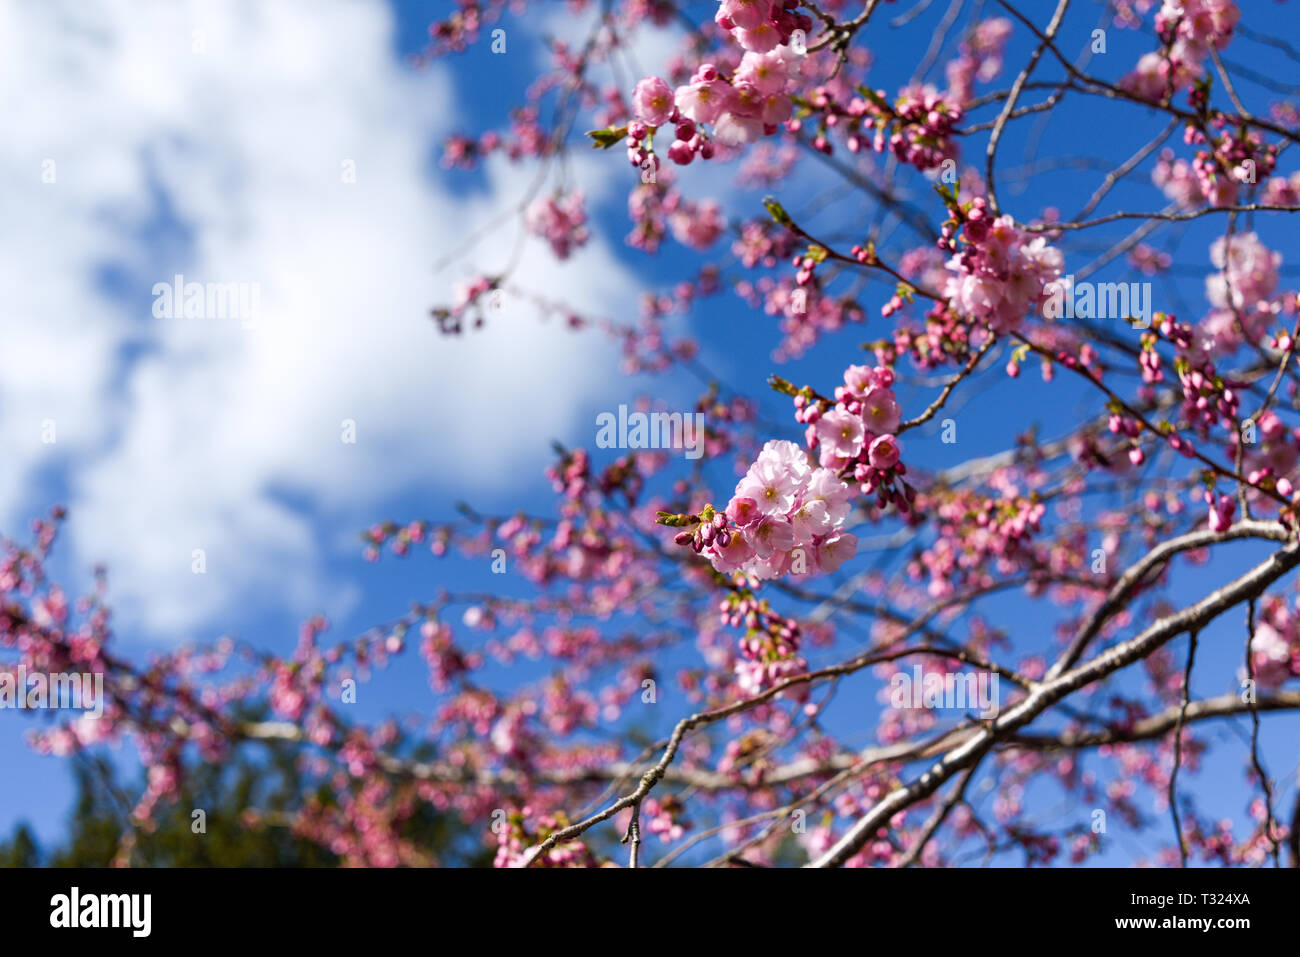 Pink Cherry Blossom in Springtime, Stock Photo